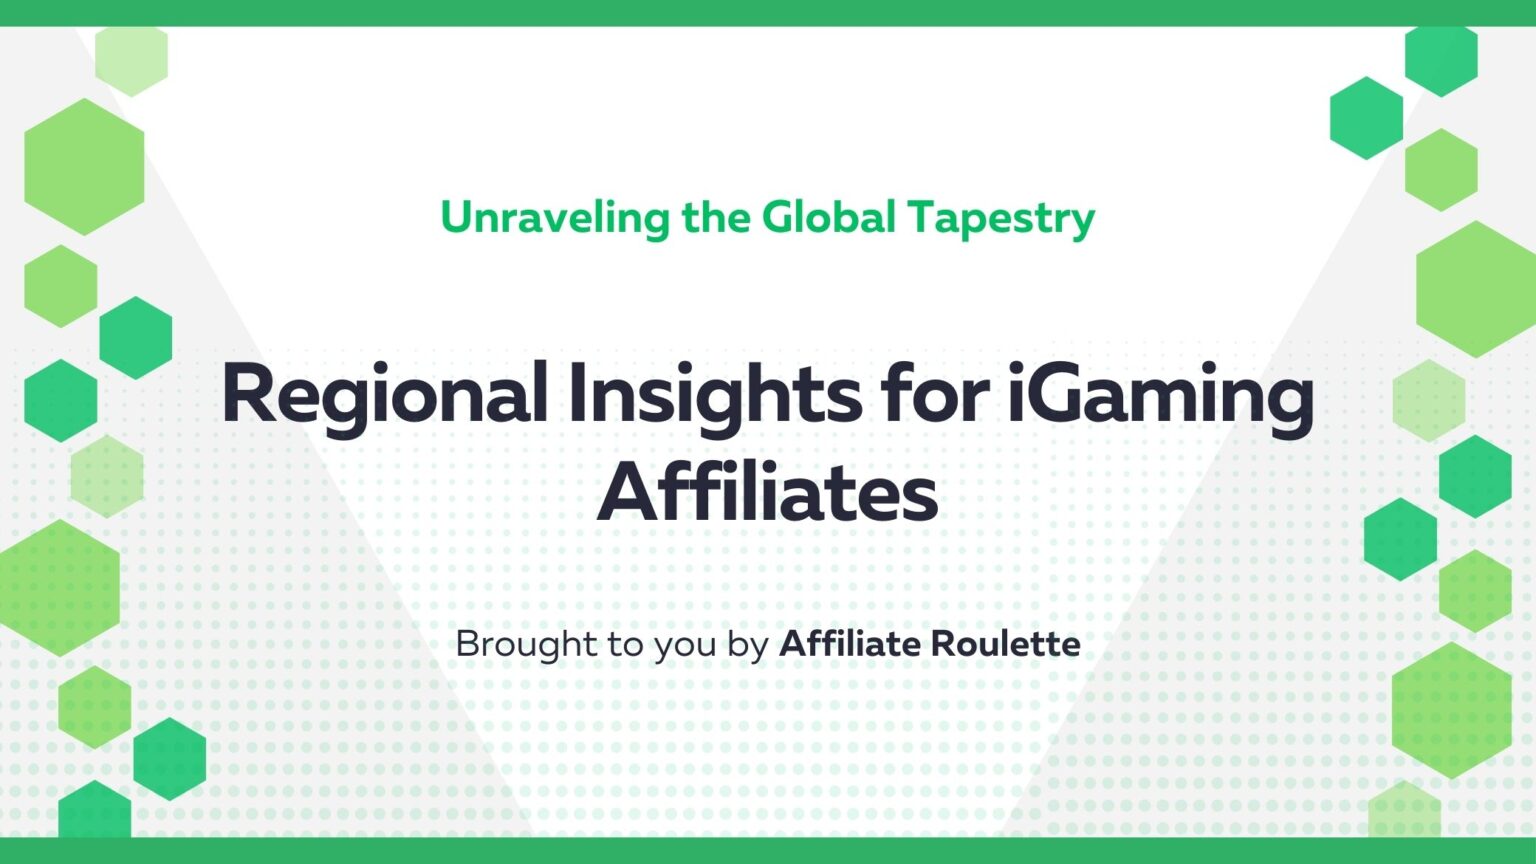 Unraveling the Global Tapestry: Regional Insights for iGaming Affiliates